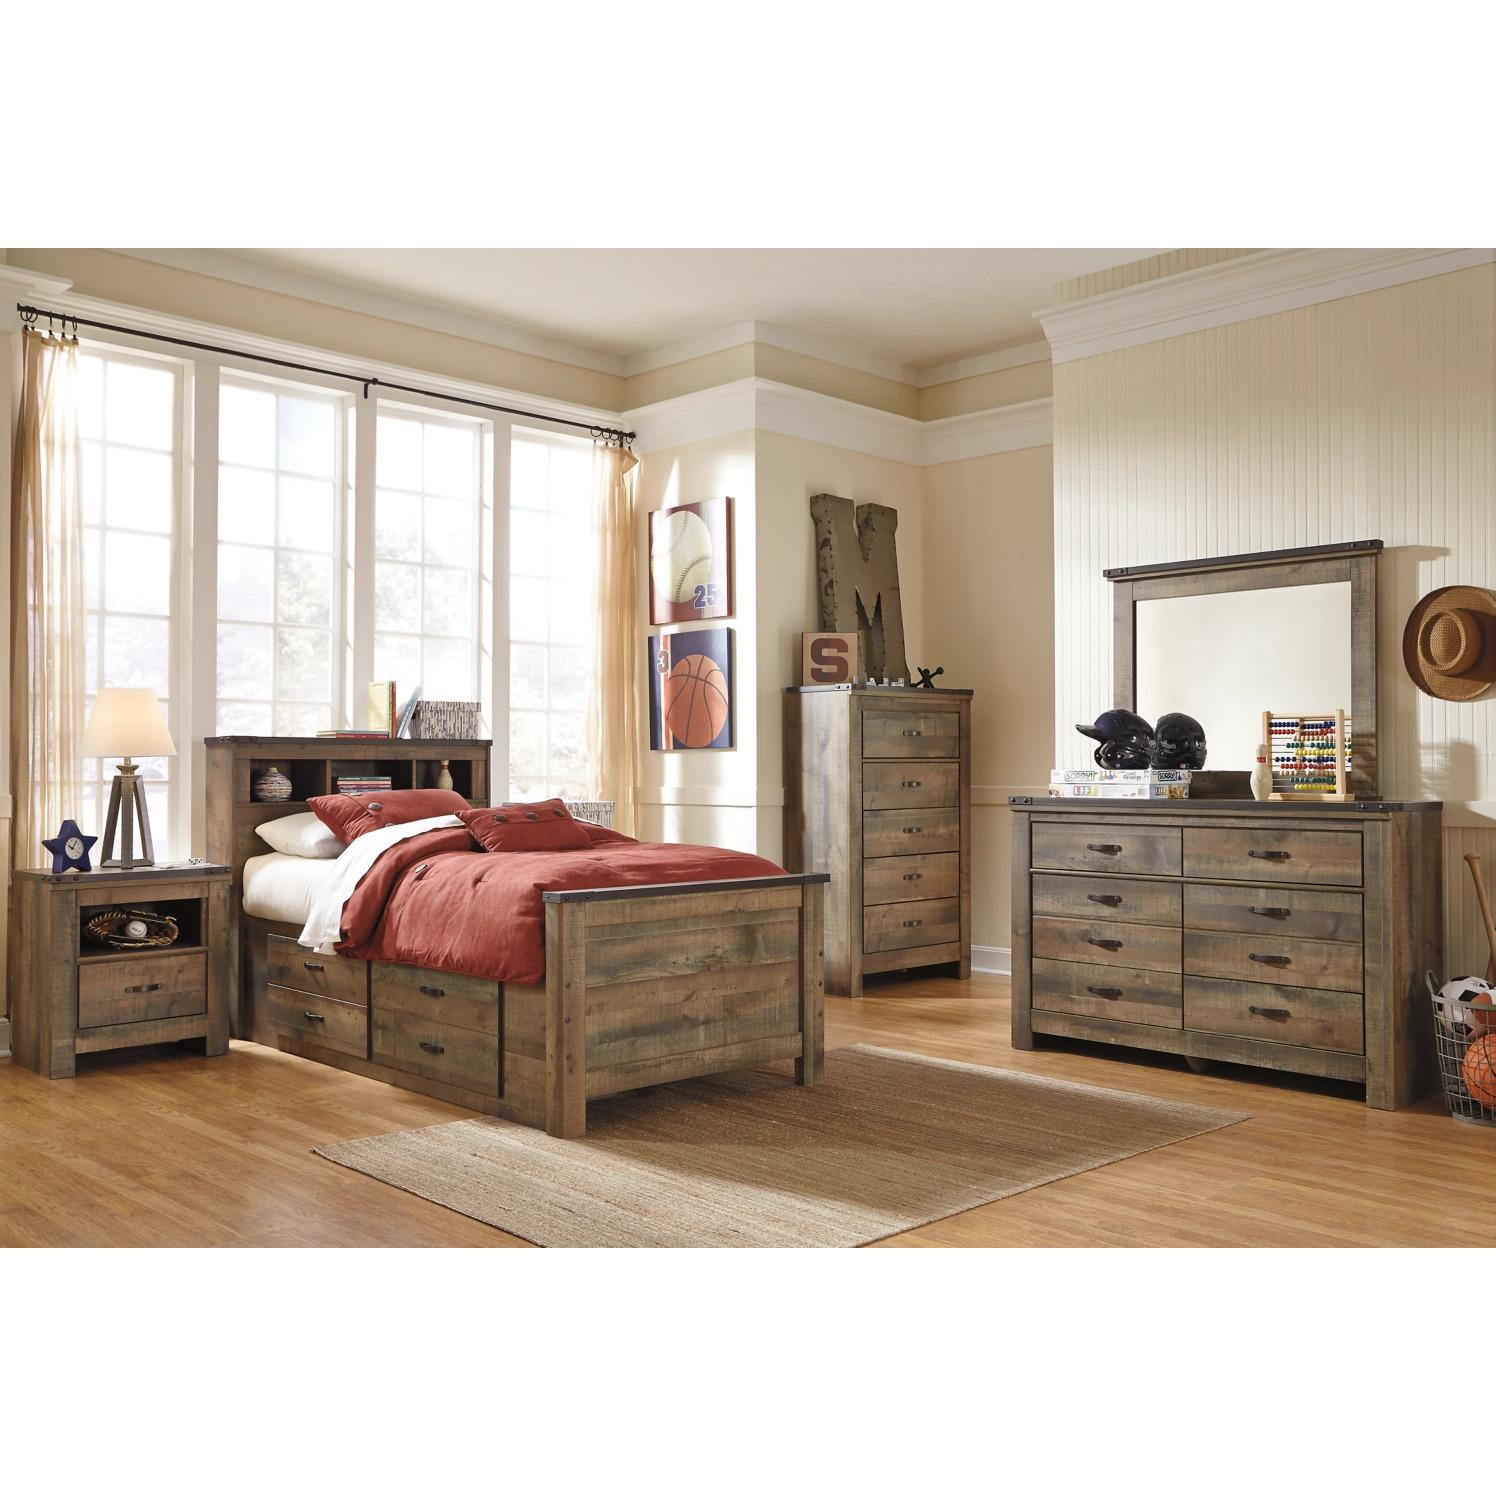 Signature Design by Ashley Trinell B446B18 5 pc Twin Bookcase Bedroom Set IMAGE 1